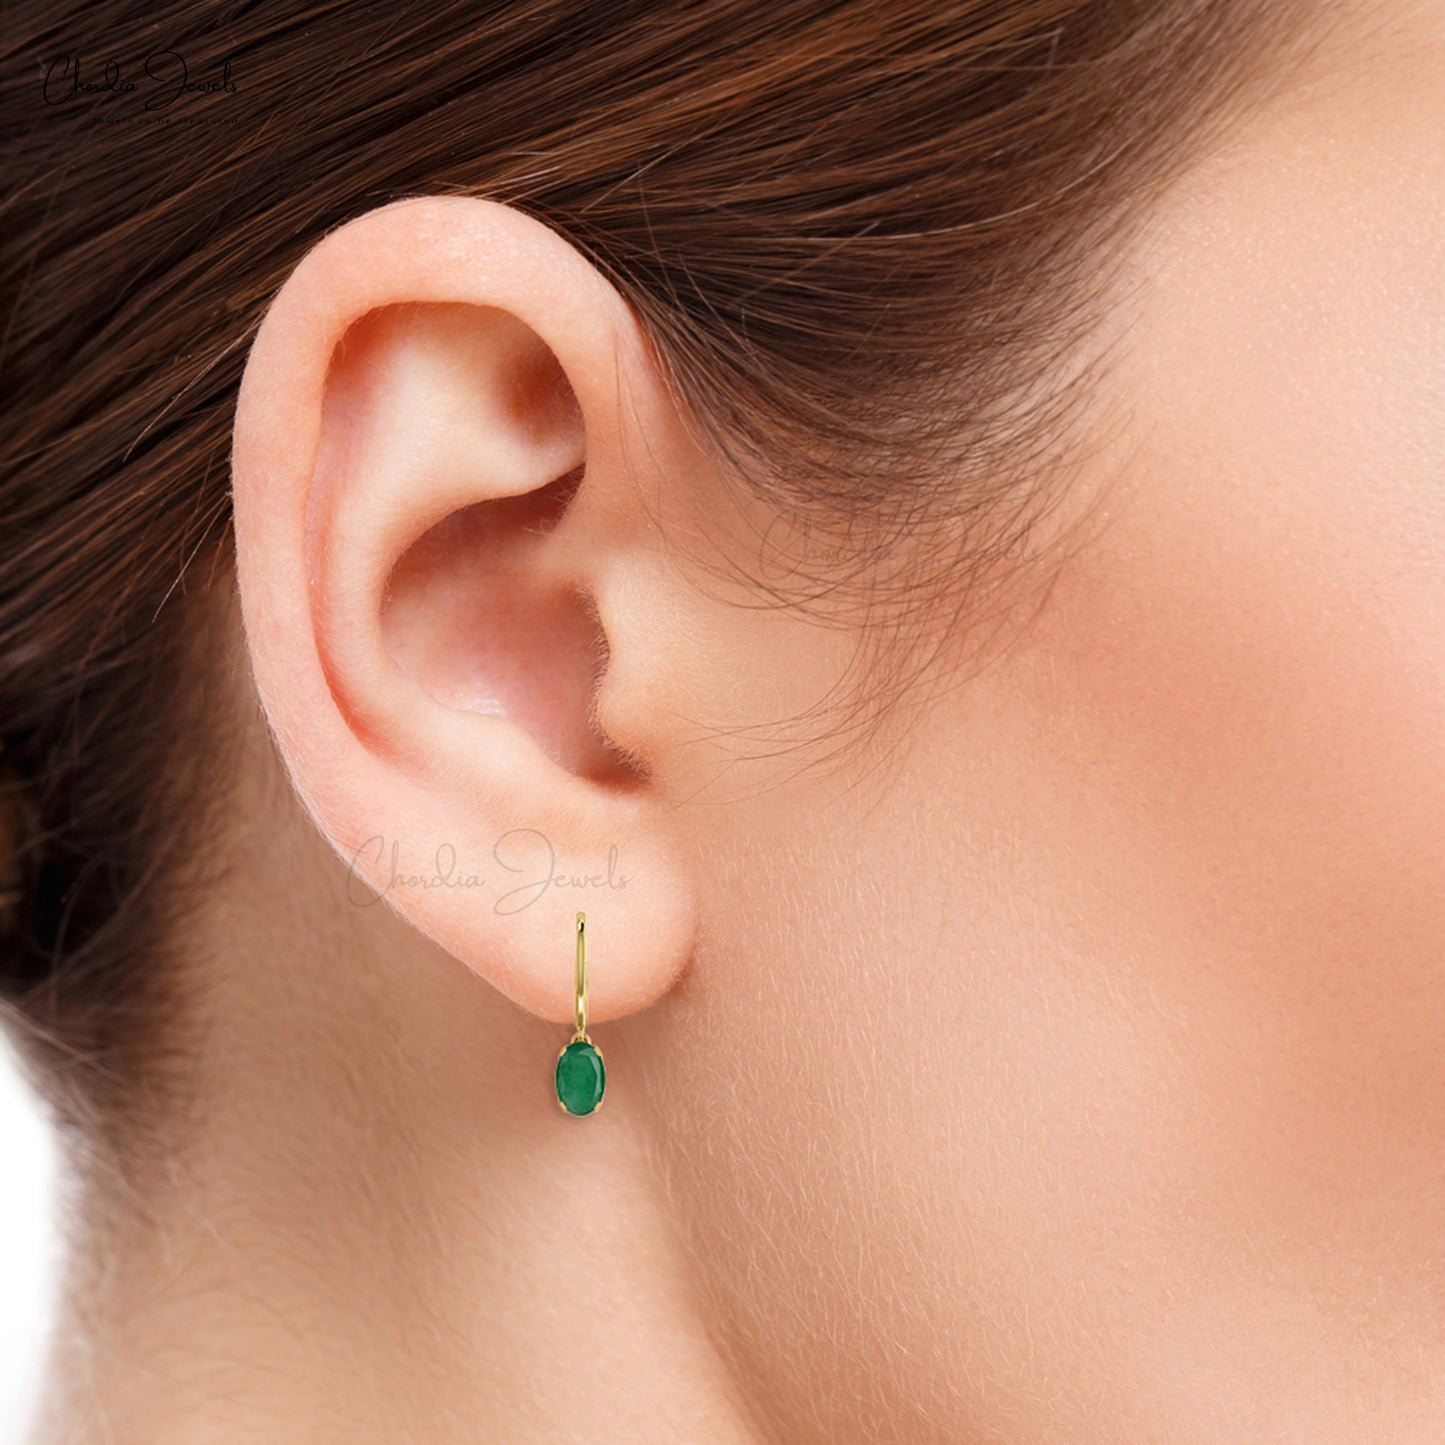 Load image into Gallery viewer, Genuine Emerald Dangling Earrings 14k Real Gold 6x4mm Oval Cut Lever Back Minimalist Hallmarked Earrings For Her
